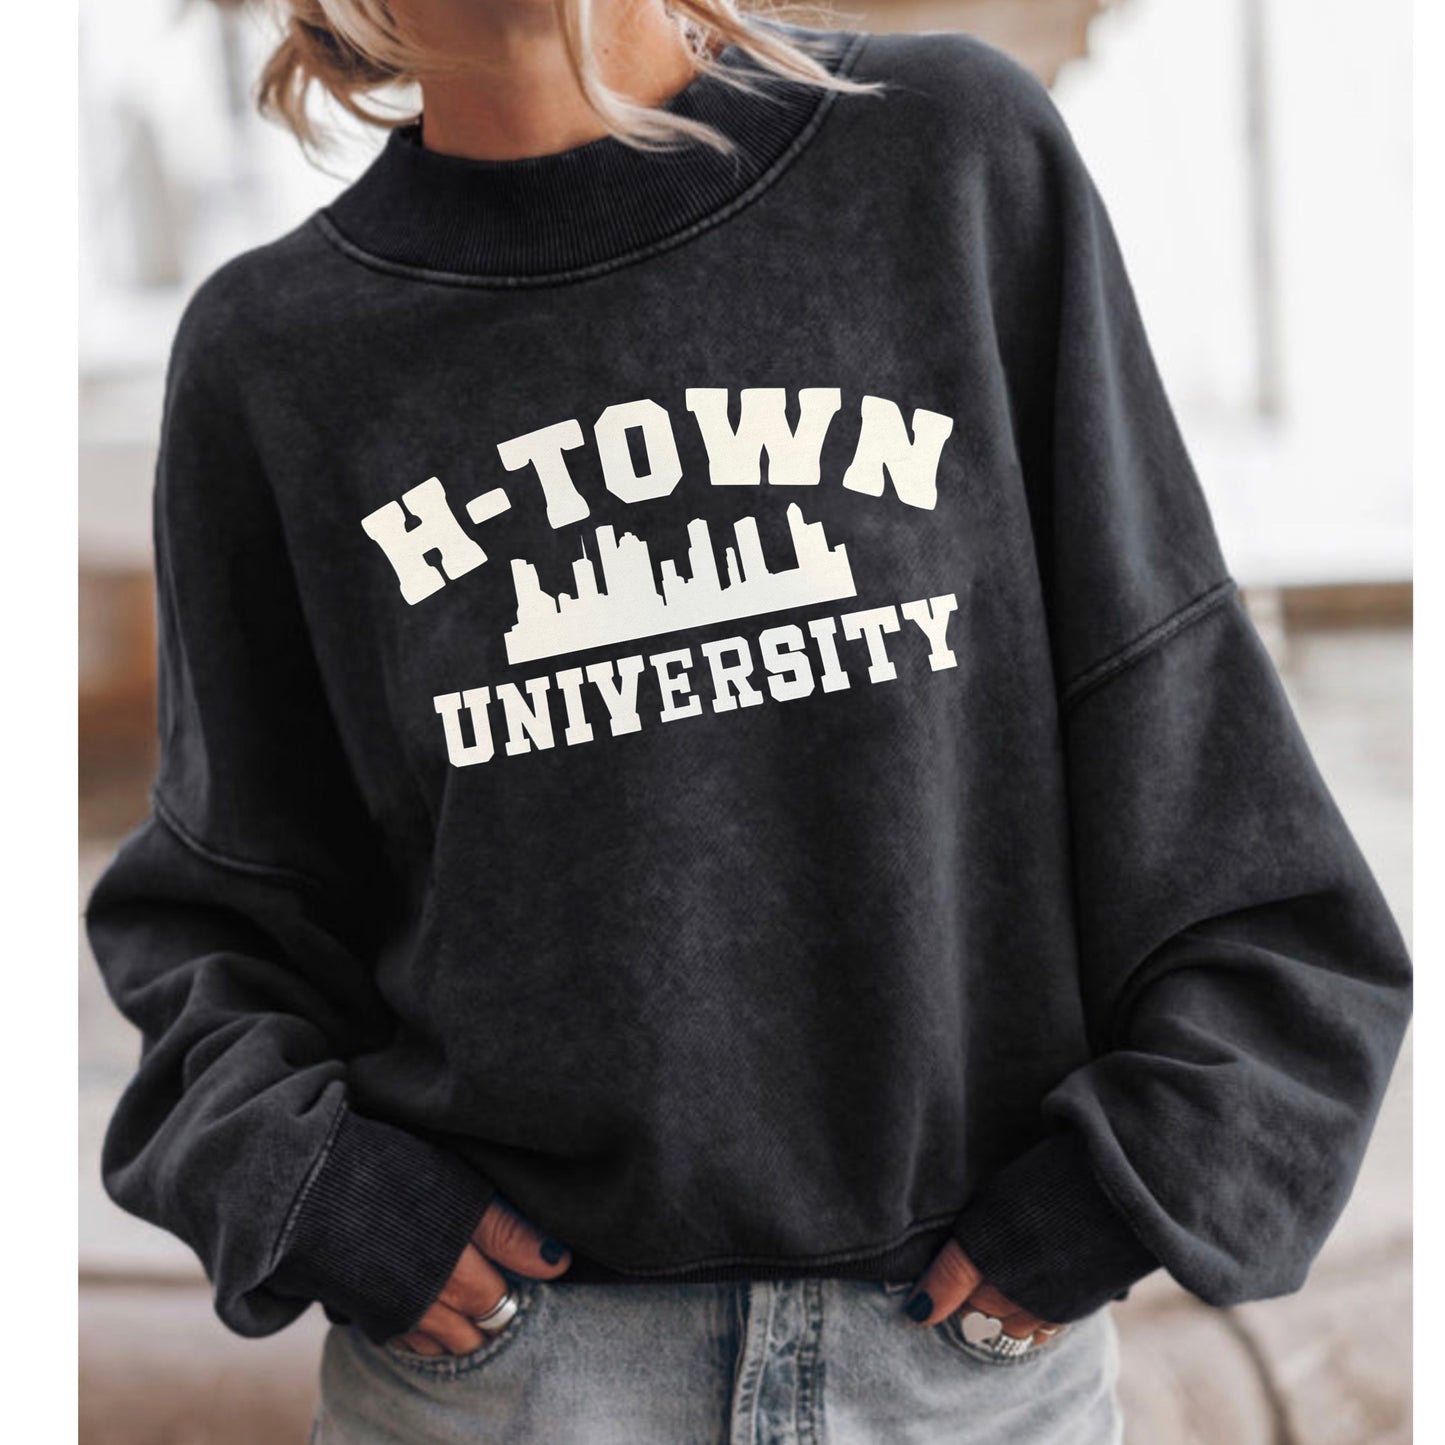 H-Town University Pullover